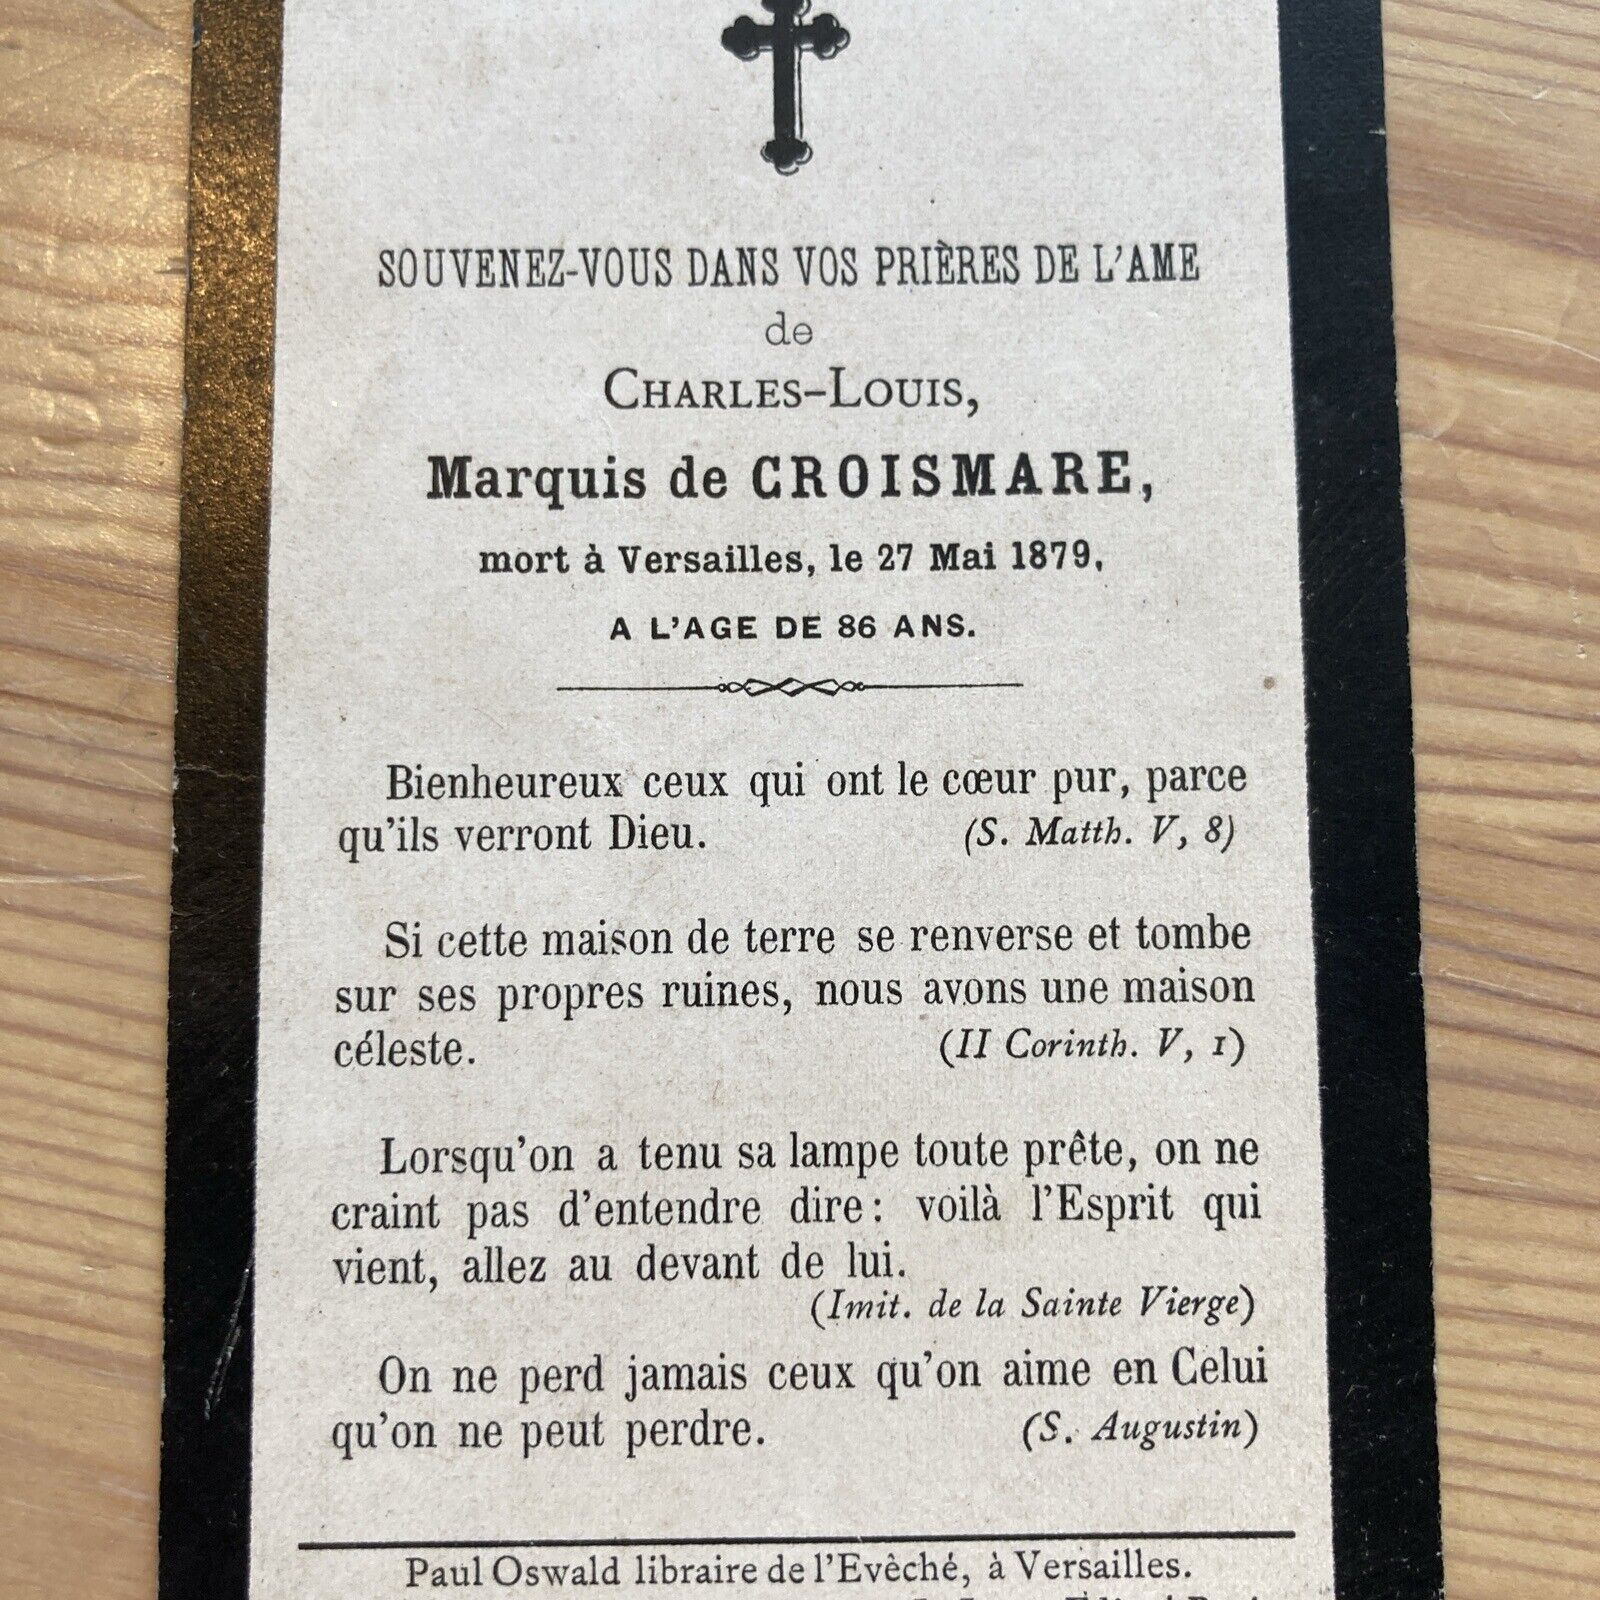 1879 Mourning Card Charles Louis, Marquis De Croismare, Versailles Died Aged 86